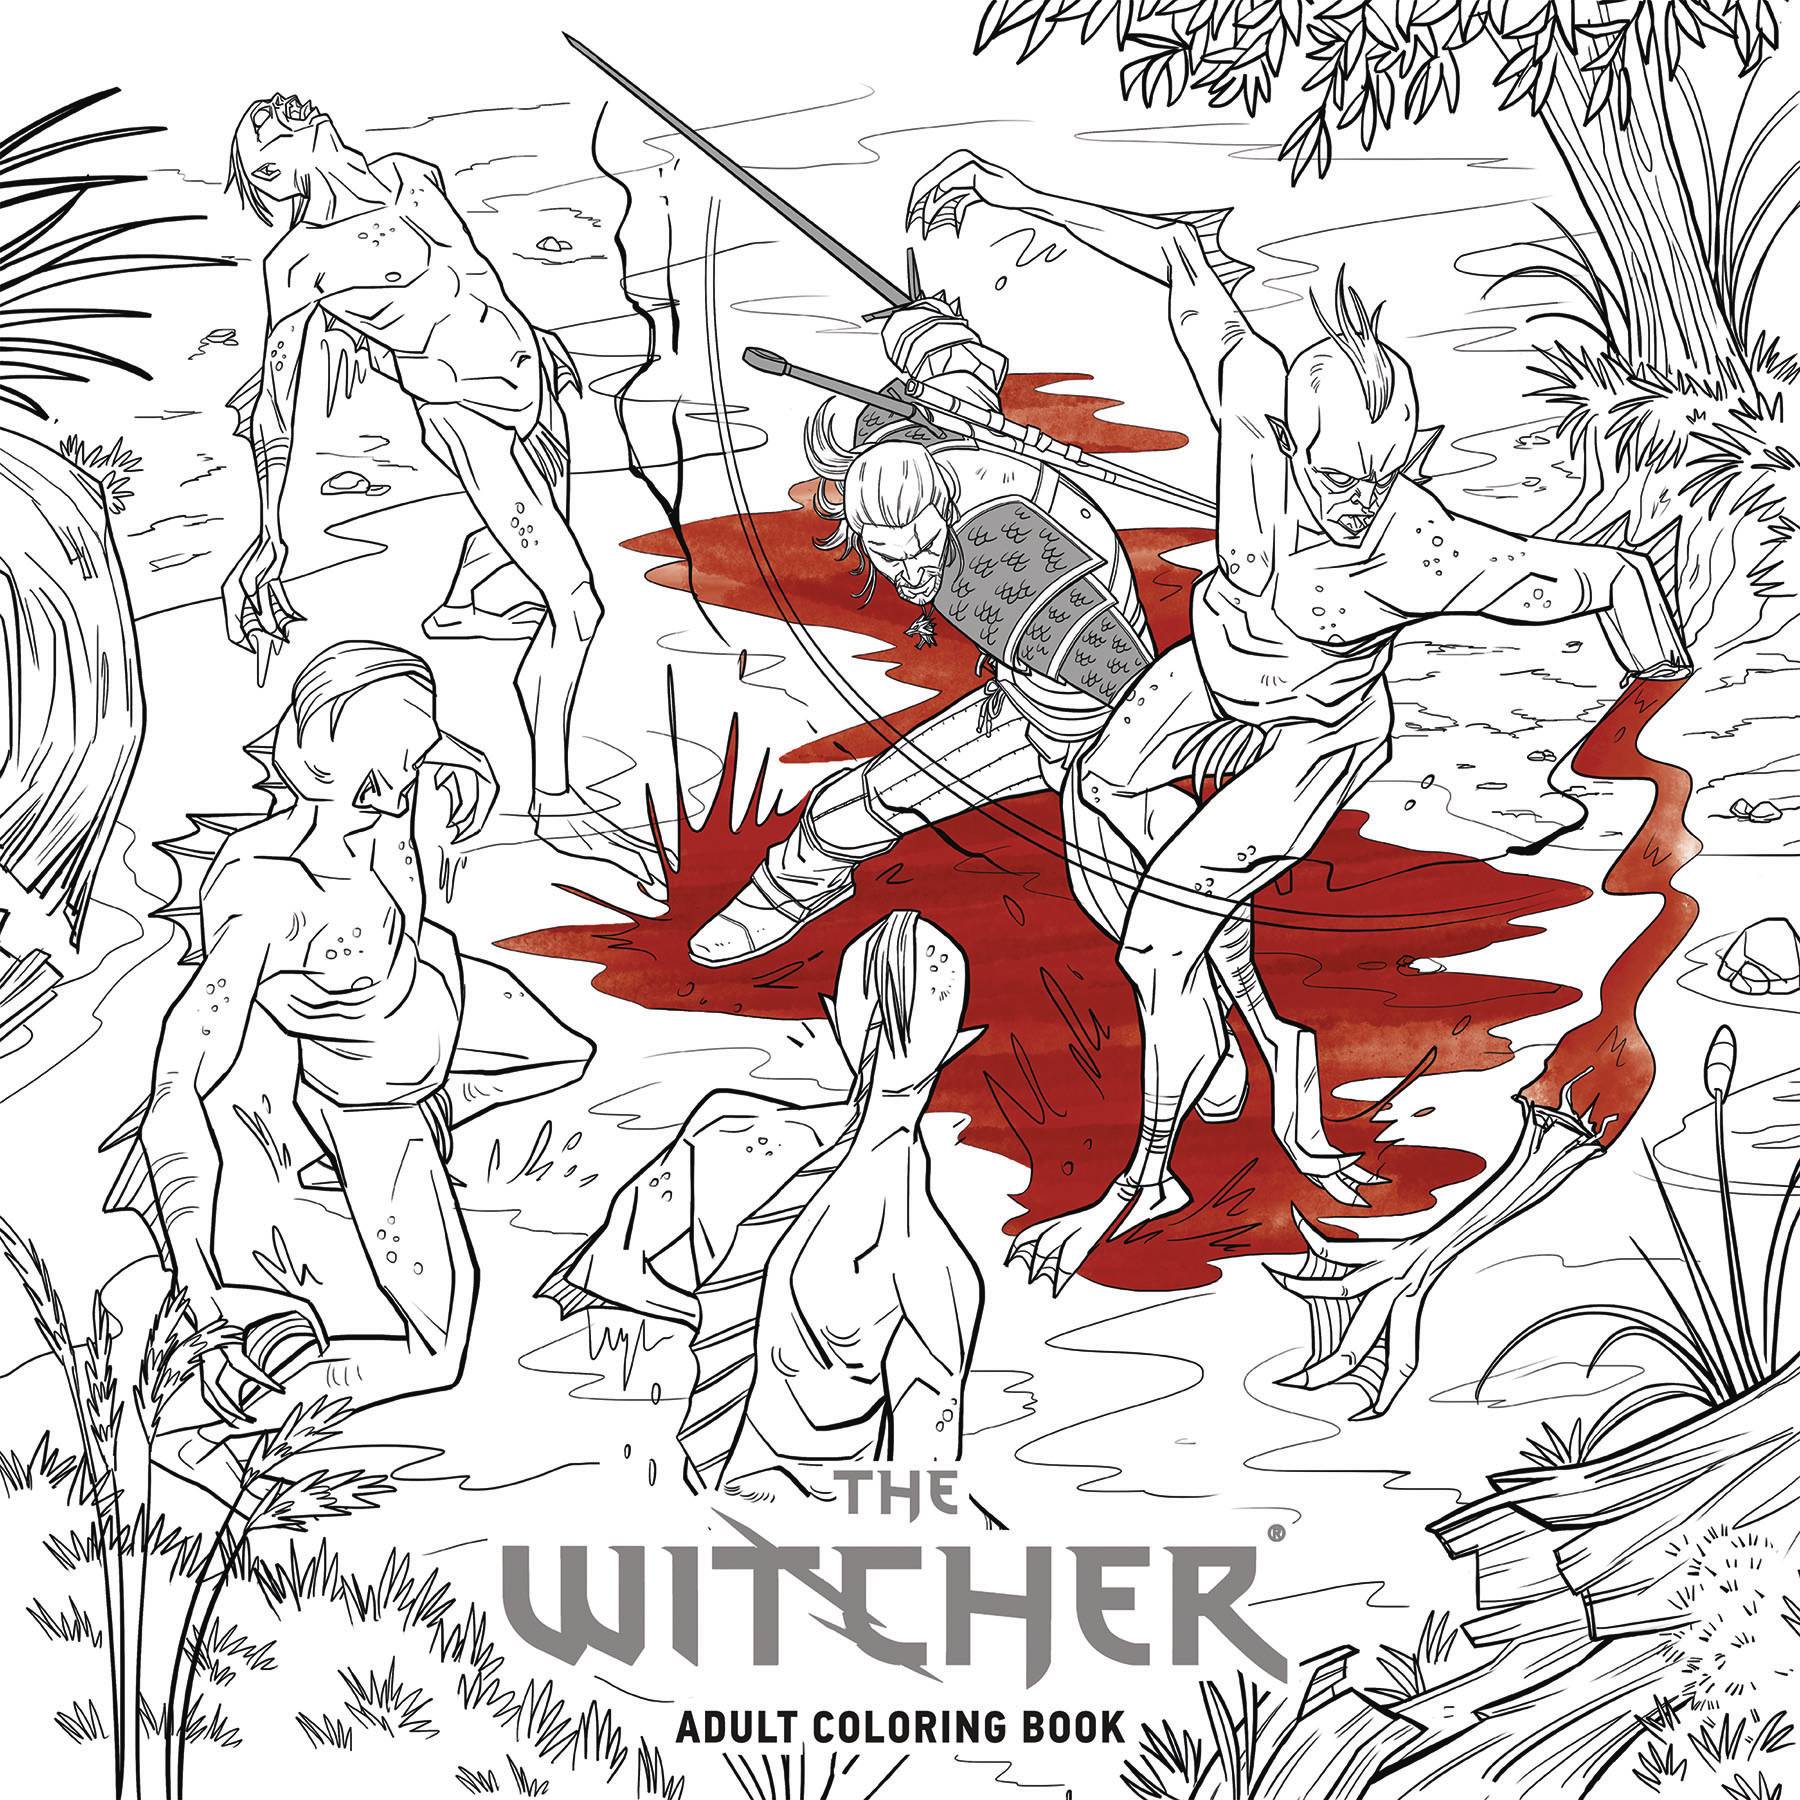 Witcher Adult Coloring Book Graphic Novel